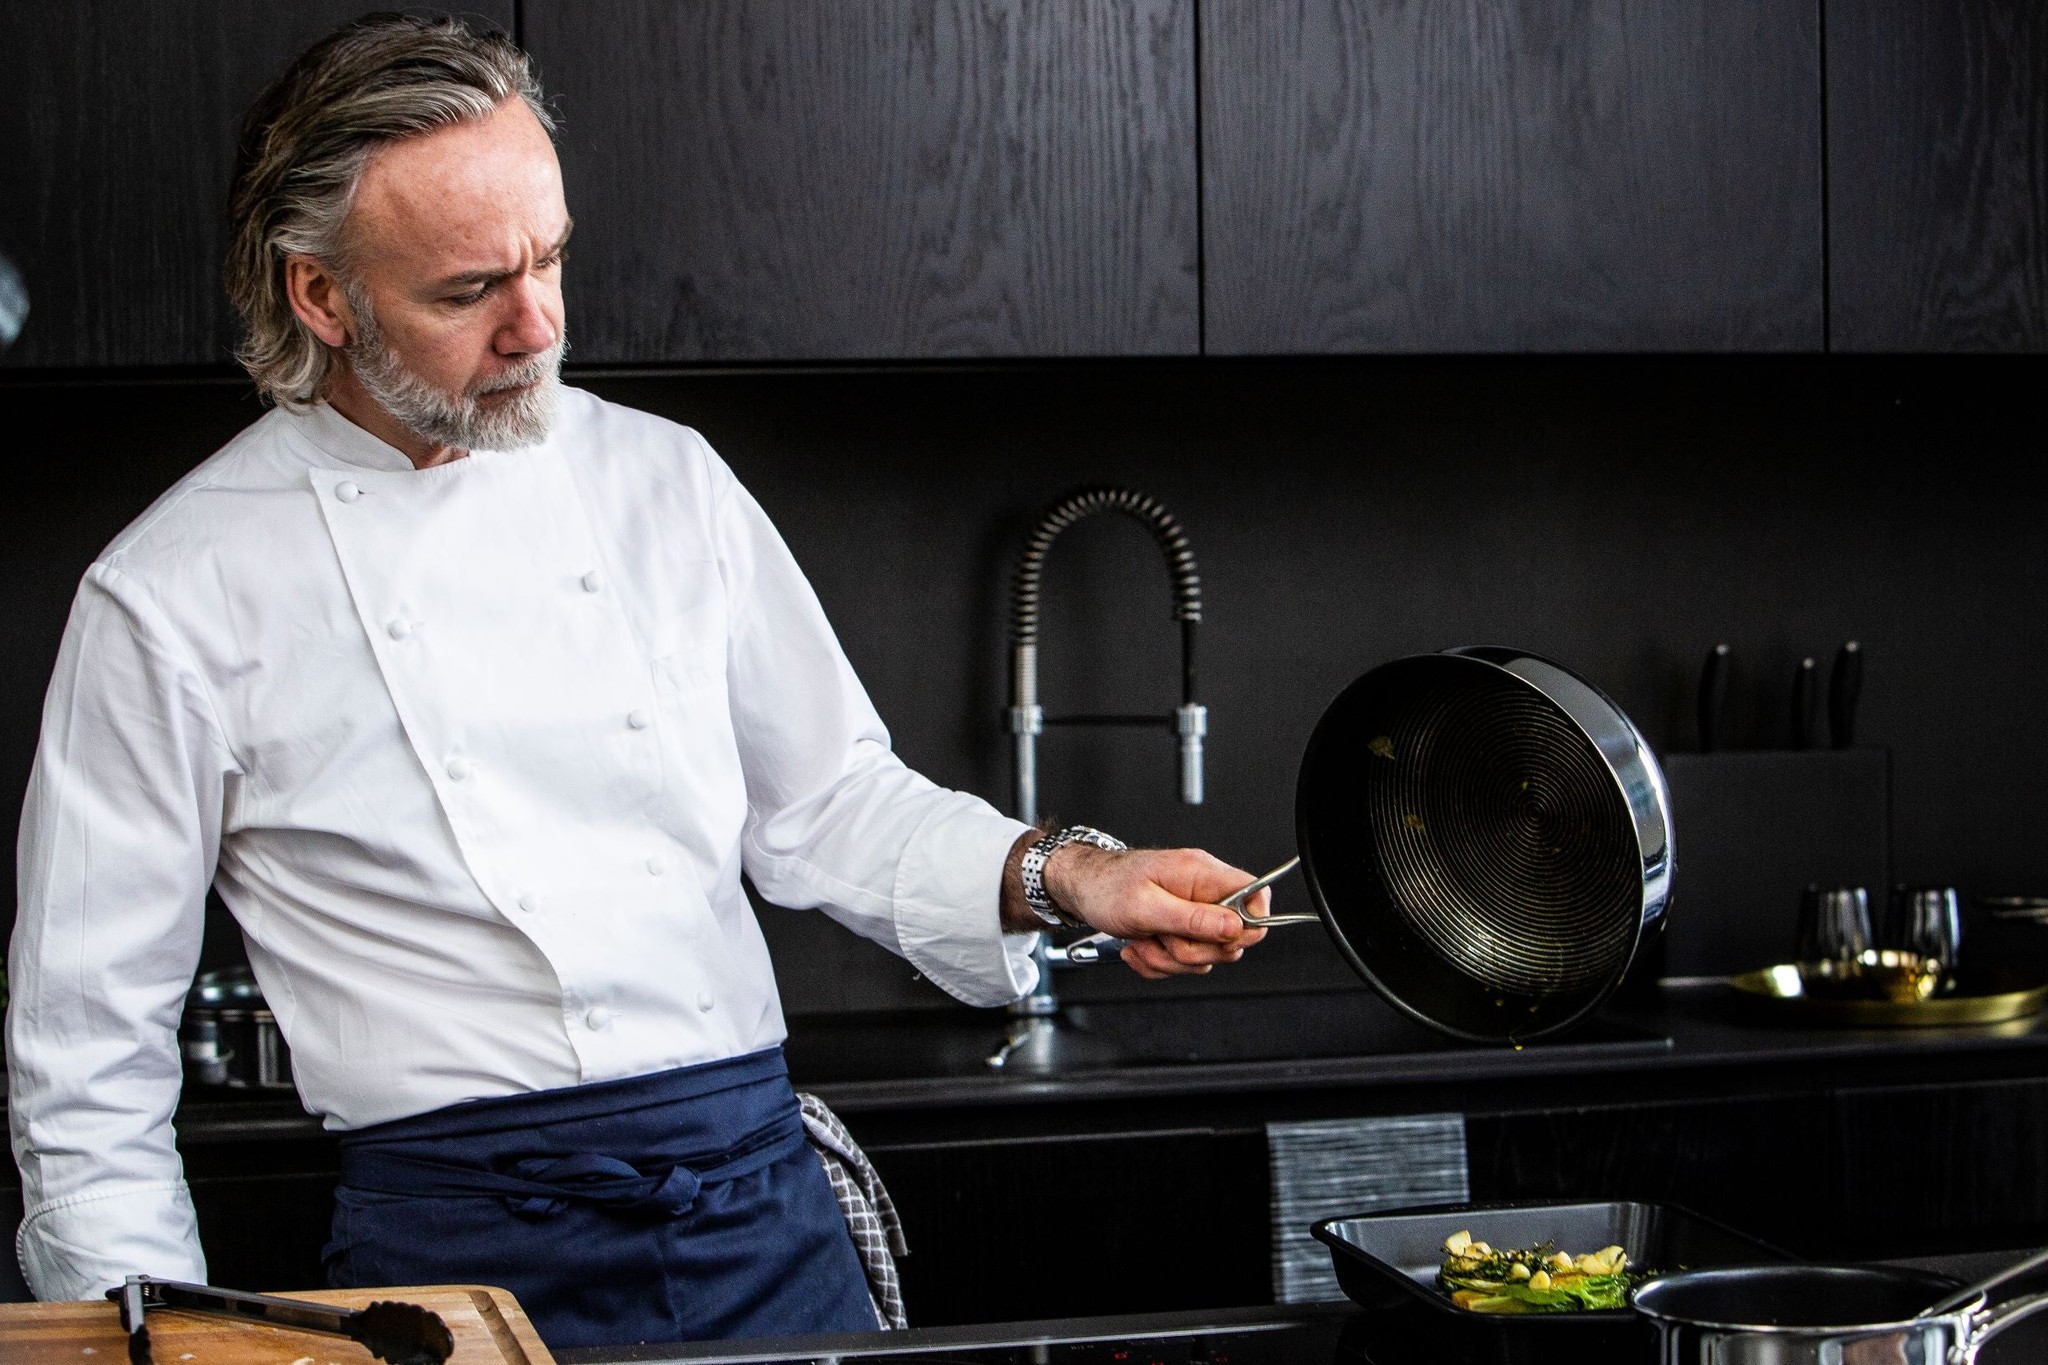 Marcus Wareing pouring oil onto a plate from a Circulon pan